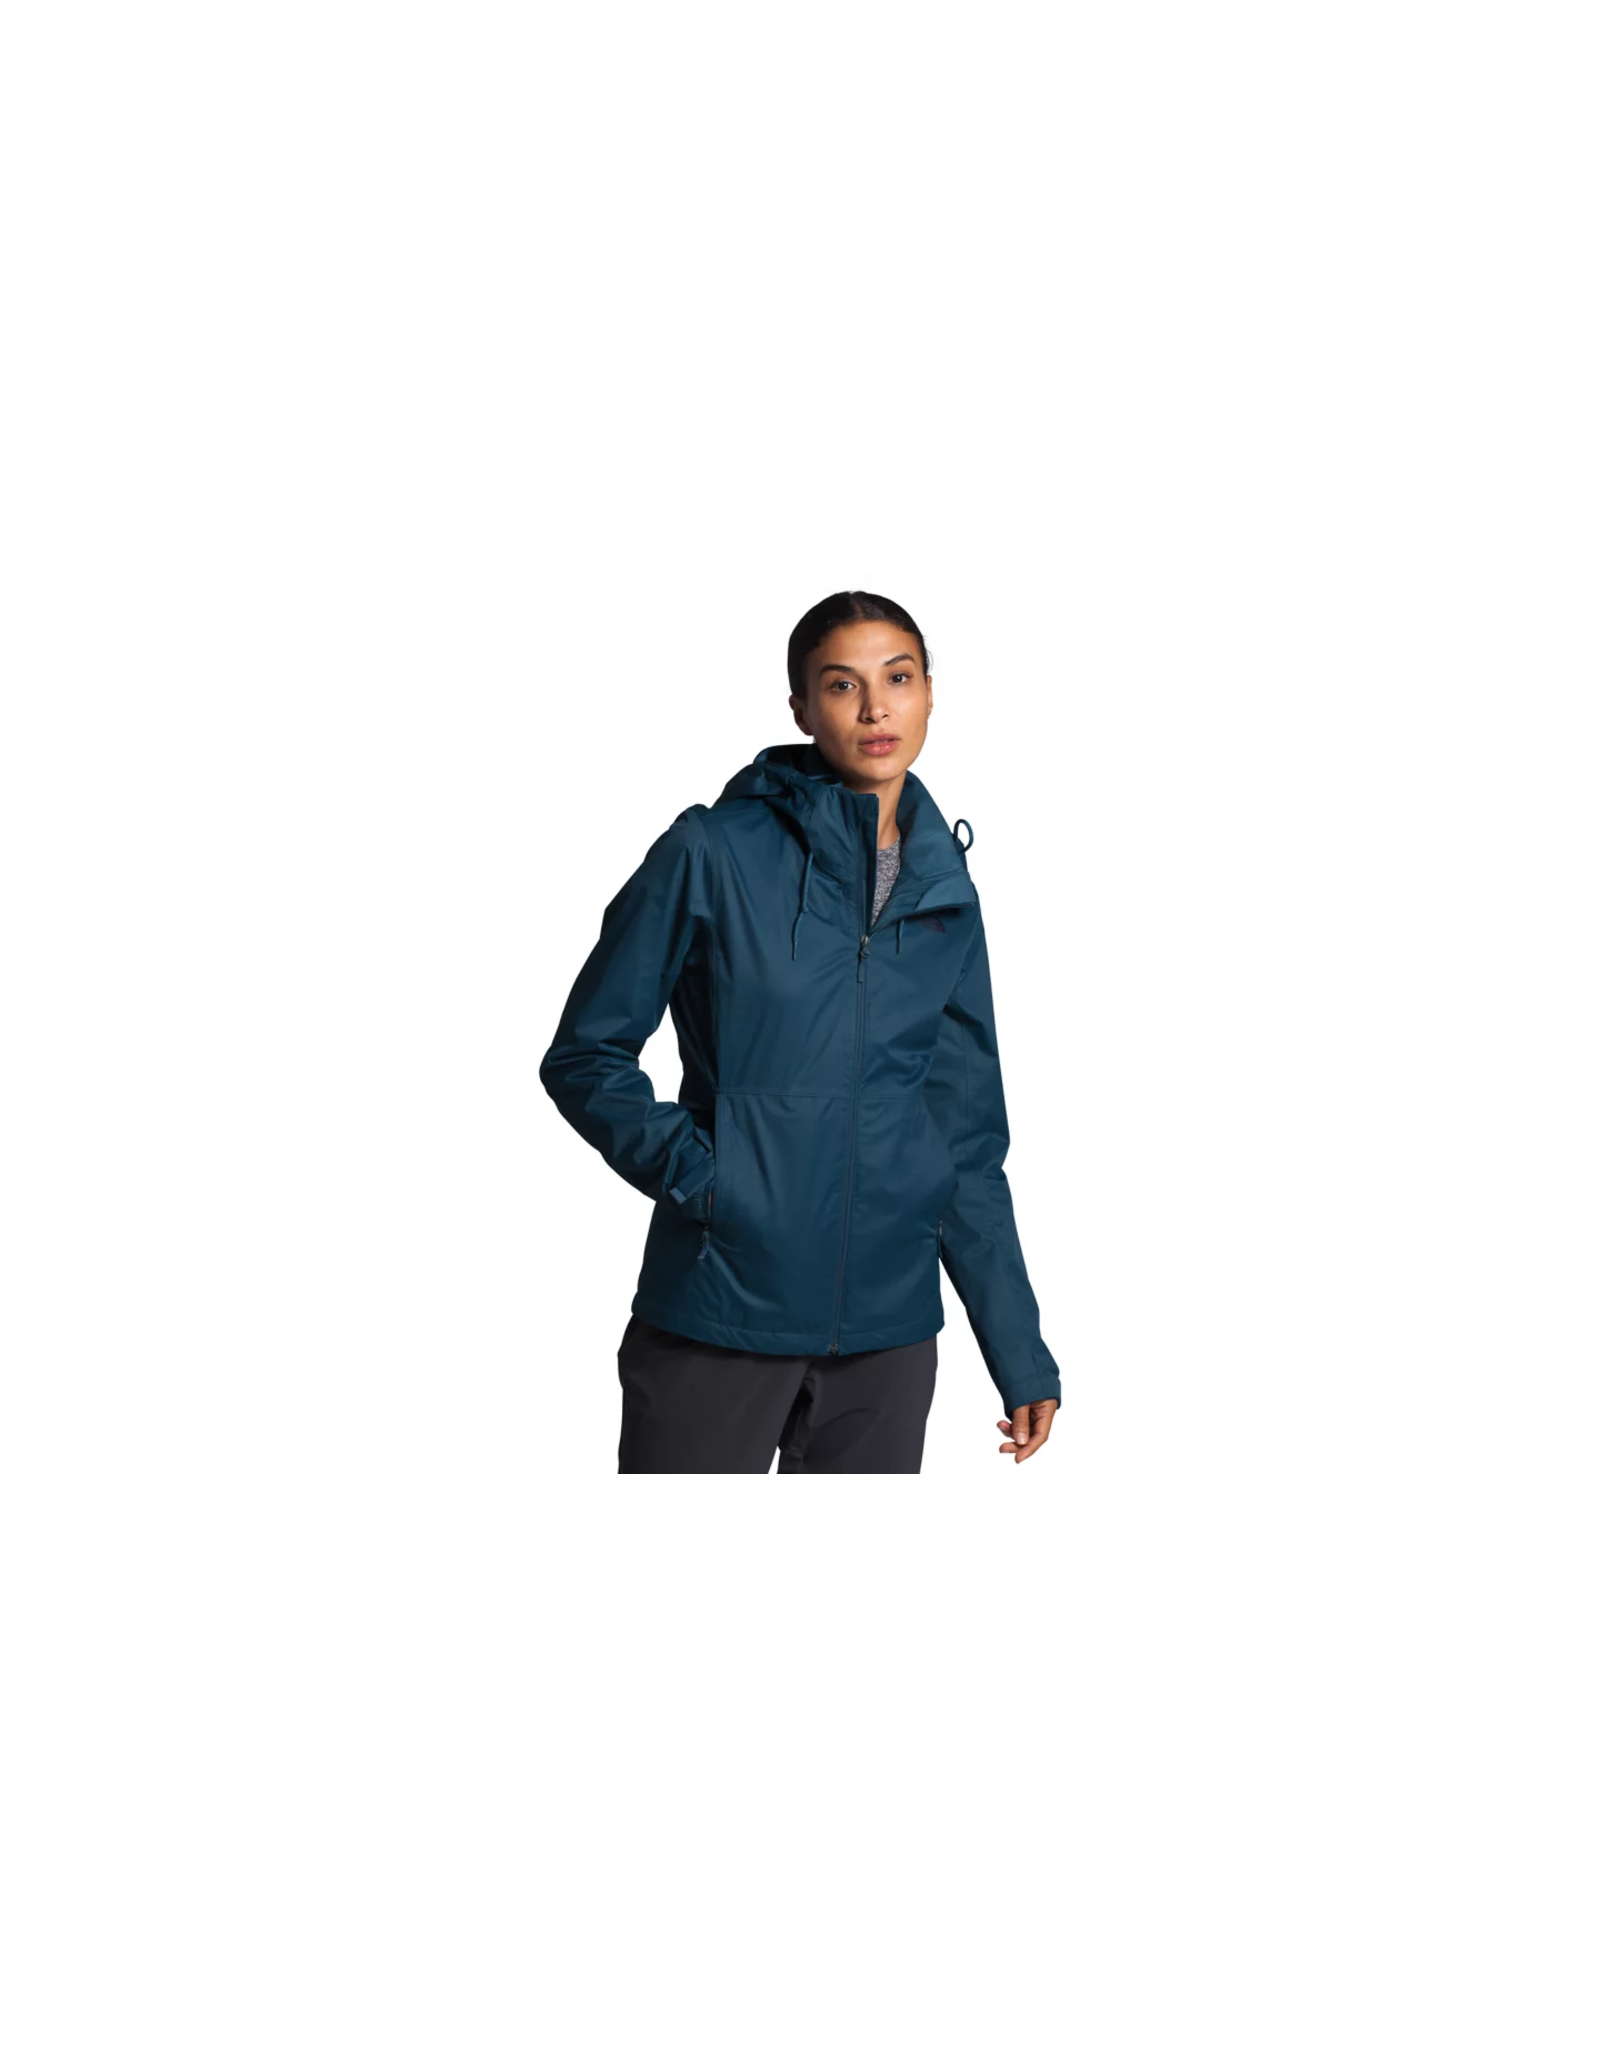 the north face arrowood triclimate womens